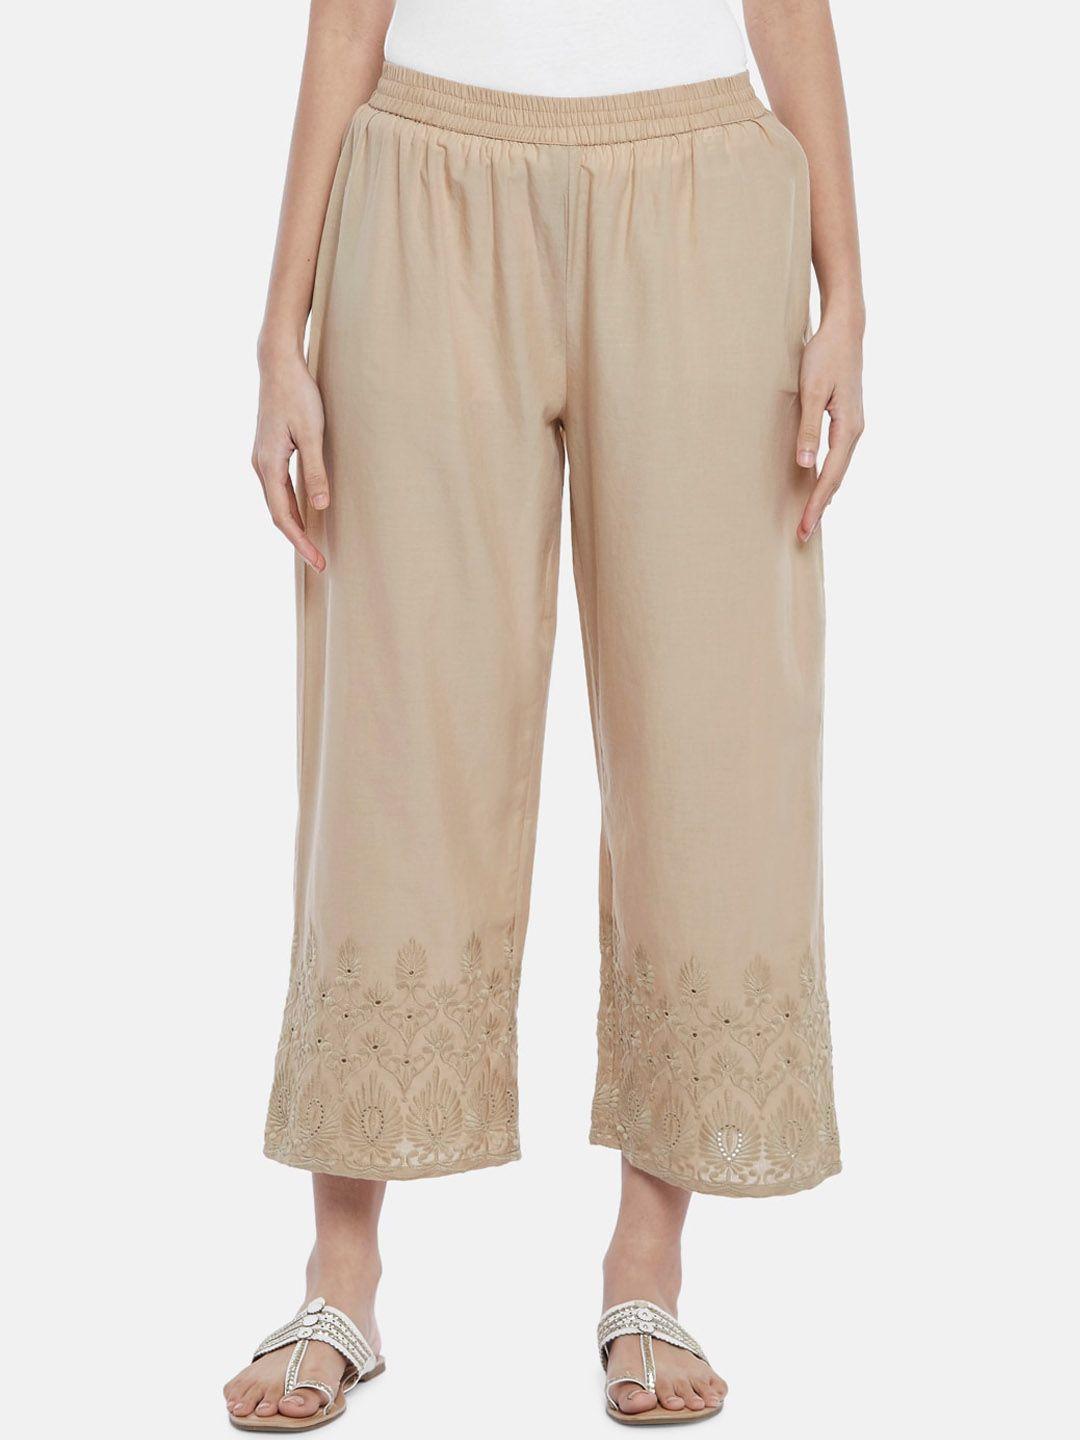 rangmanch-by-pantaloons-women-beige-textured-trousers